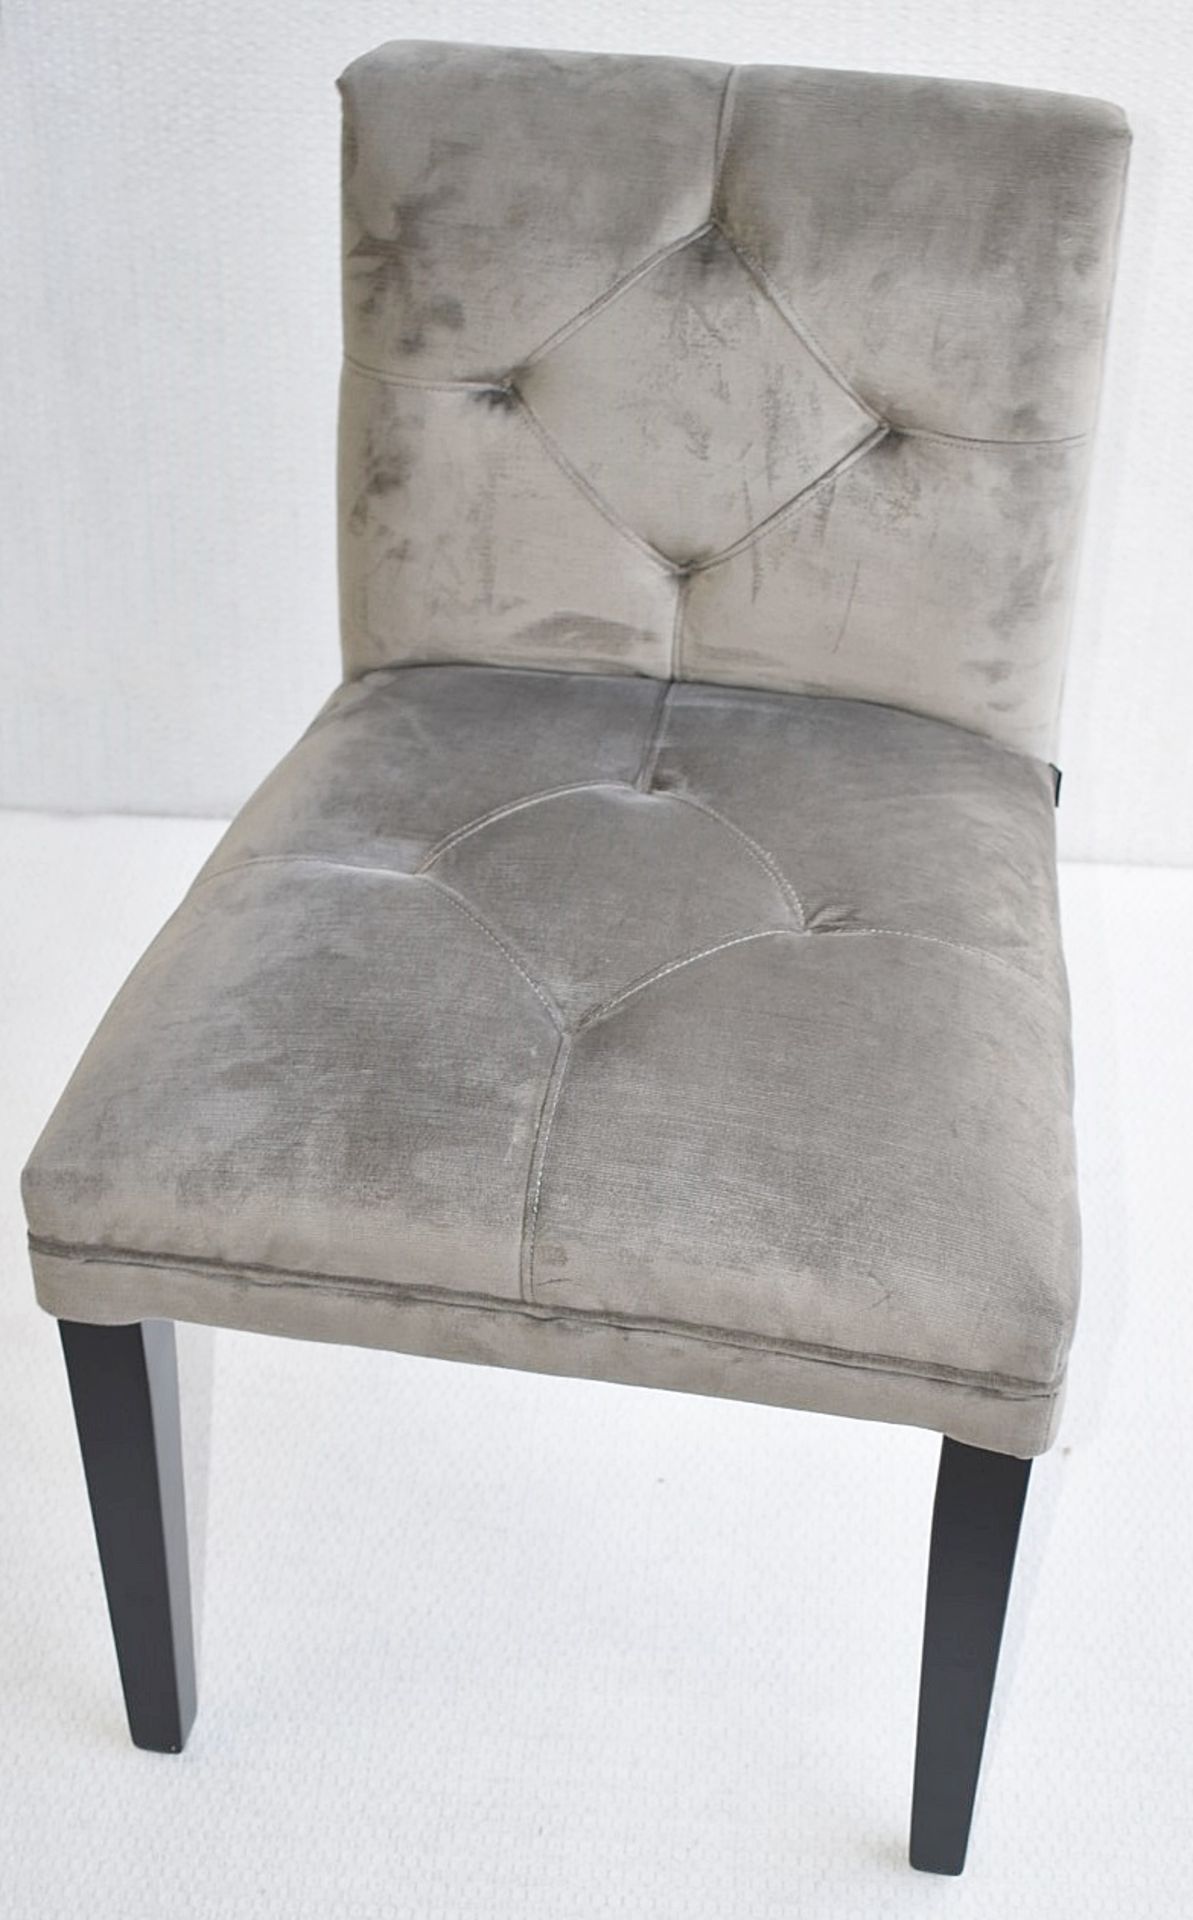 A Pair Of EICHHOLTZ 'Cesare' Luxury Button-back Dining Chairs in Granite Grey - Original RRP £1,160 - Image 5 of 10